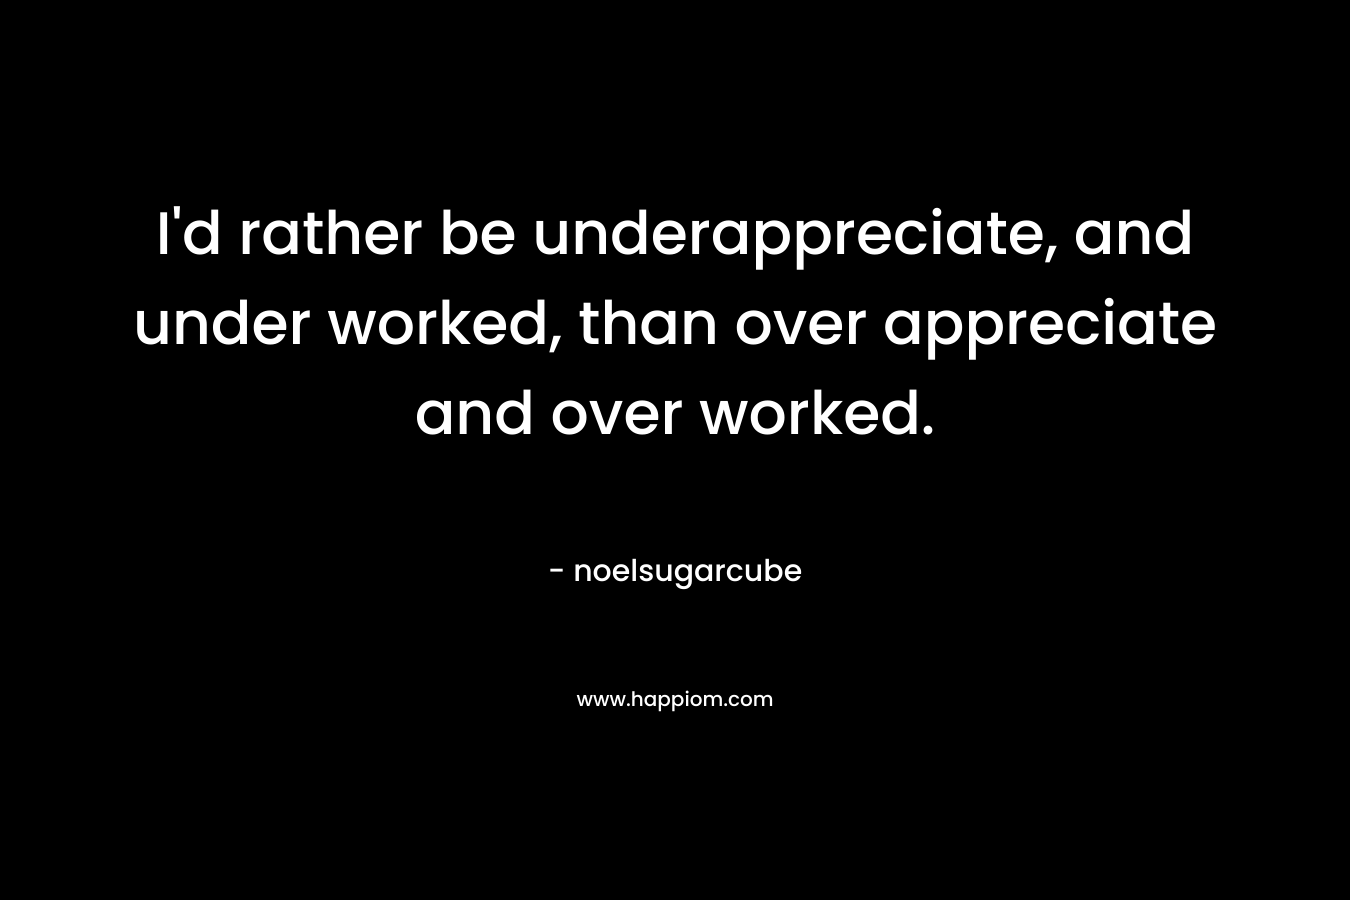 I'd rather be underappreciate, and under worked, than over appreciate and over worked.